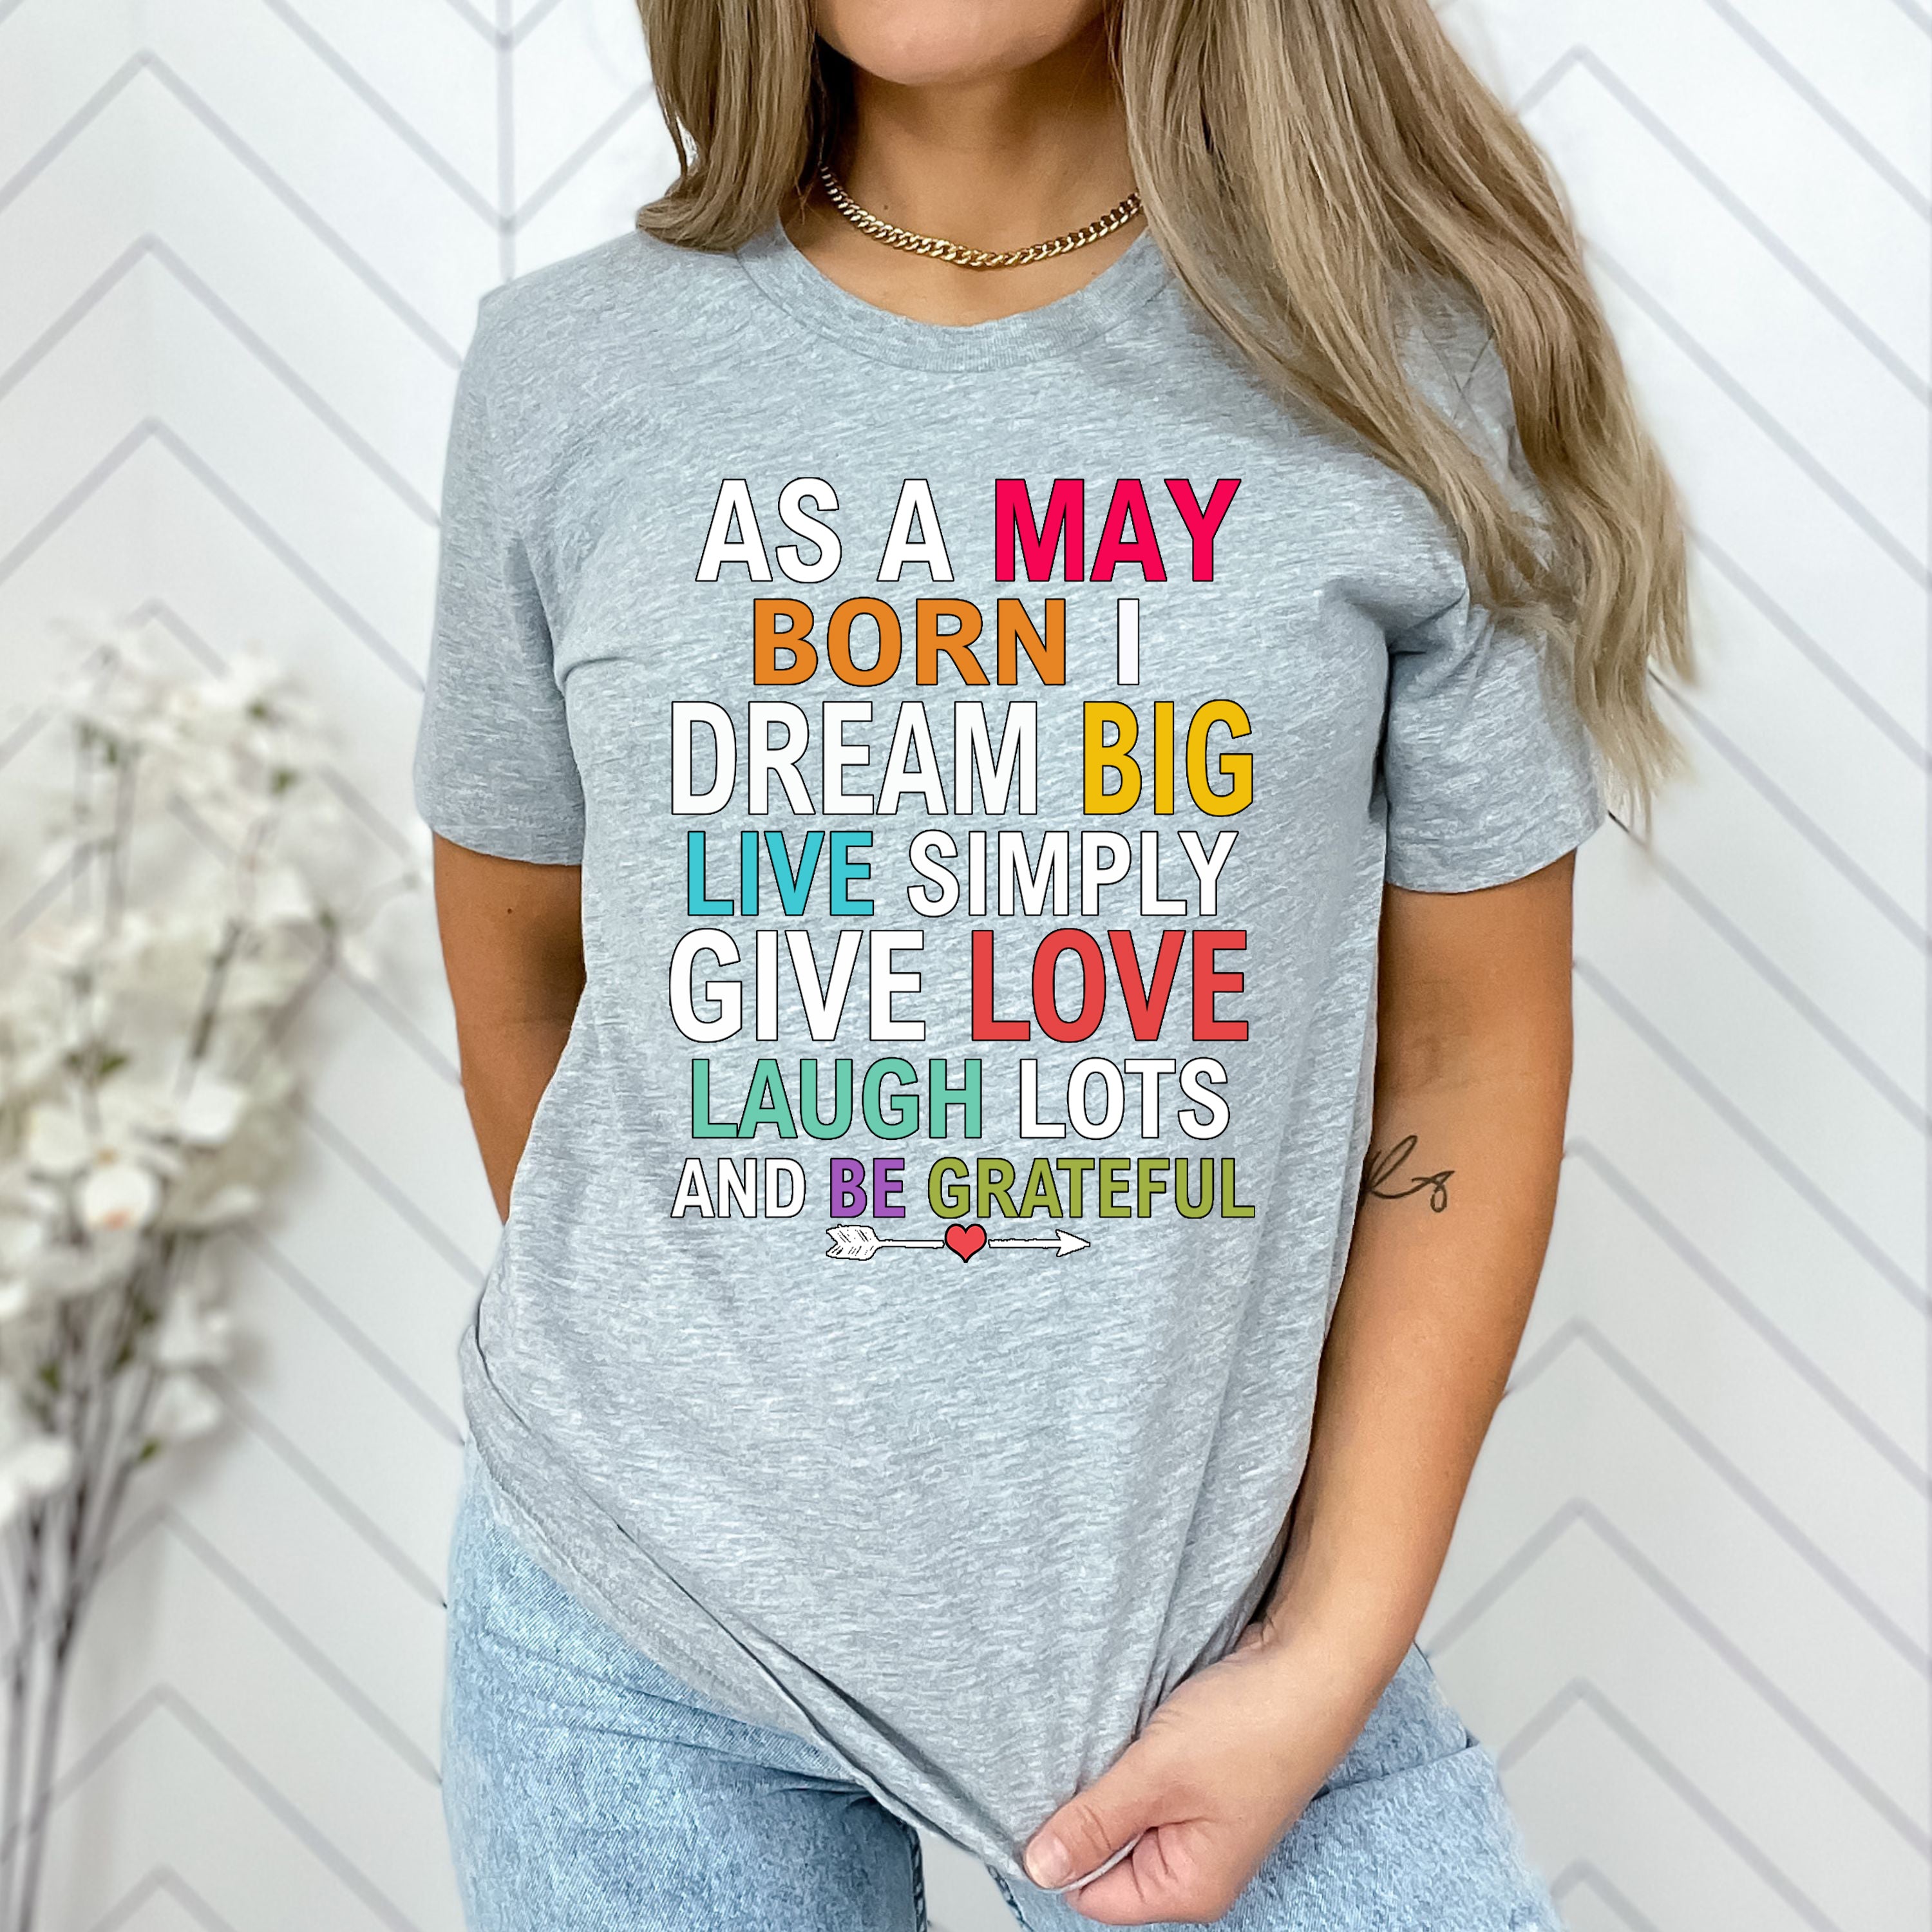 "As A May Born I Dream Big Live Simply & Be Grateful"